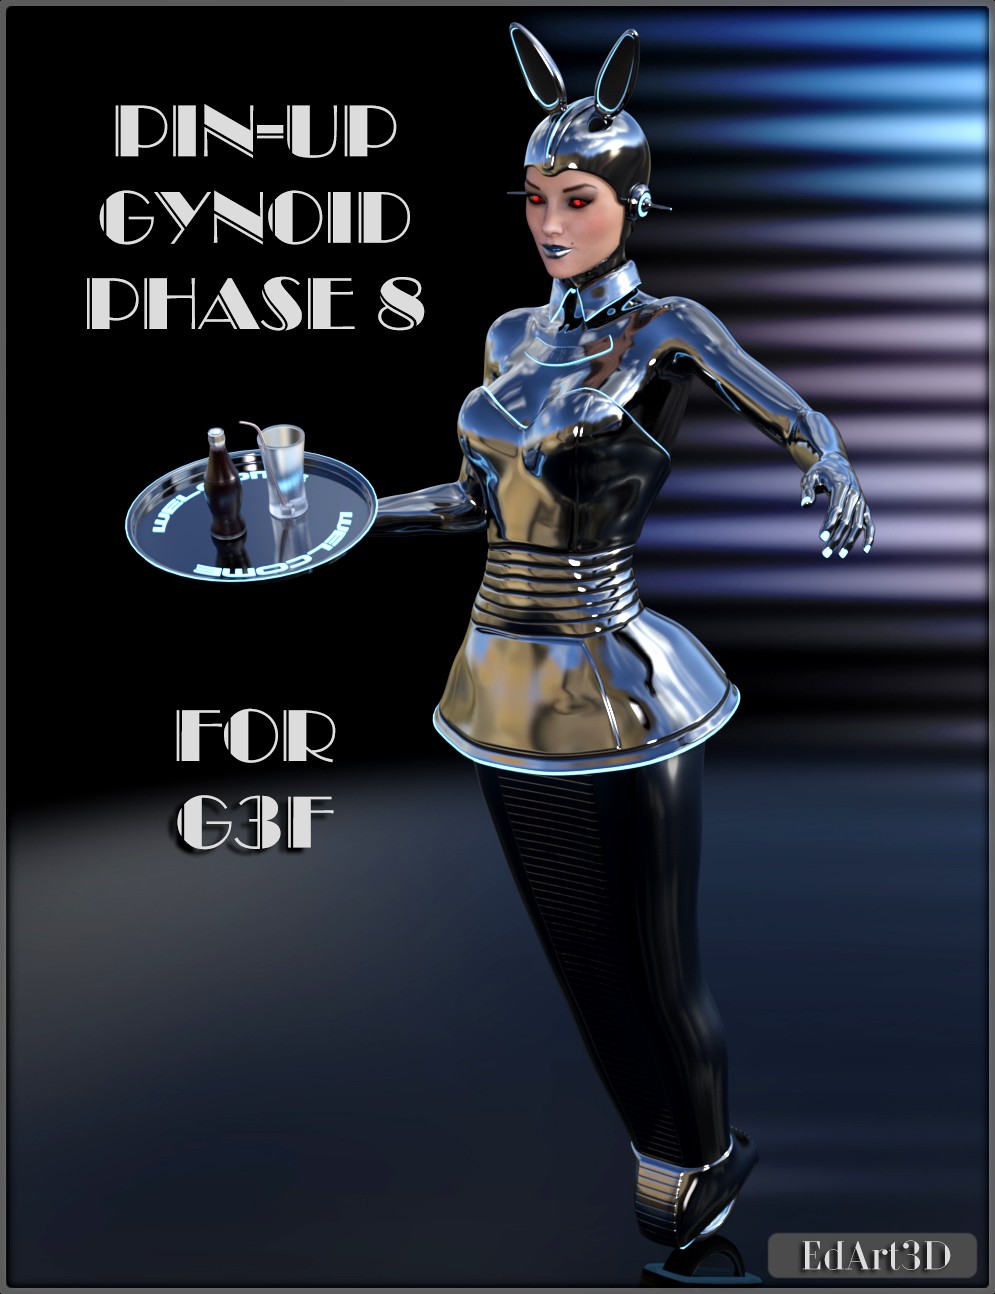 Pin-Up Gynoid Phase8 for G3F